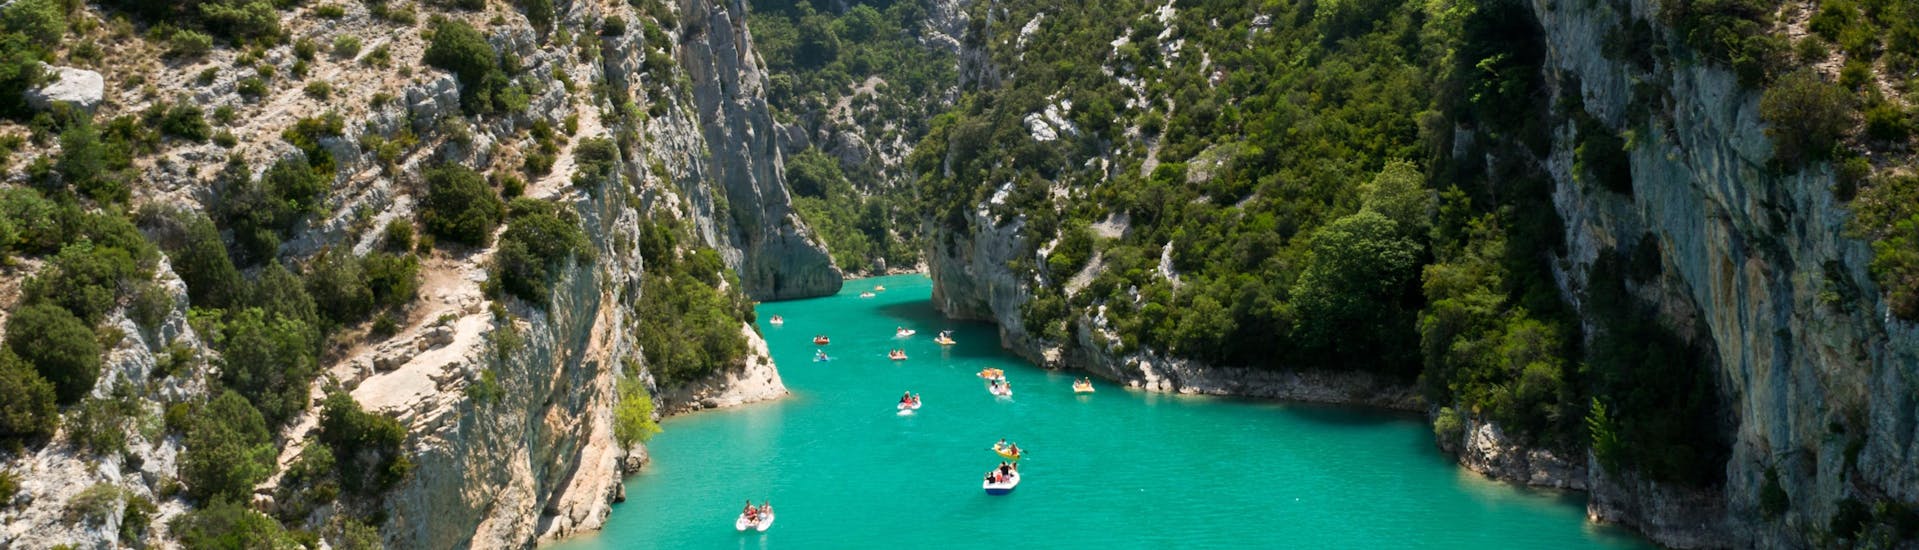 An image of the spectacular entrance to the famous gorge that attracts many visitors to go rafting on the Verdon river.